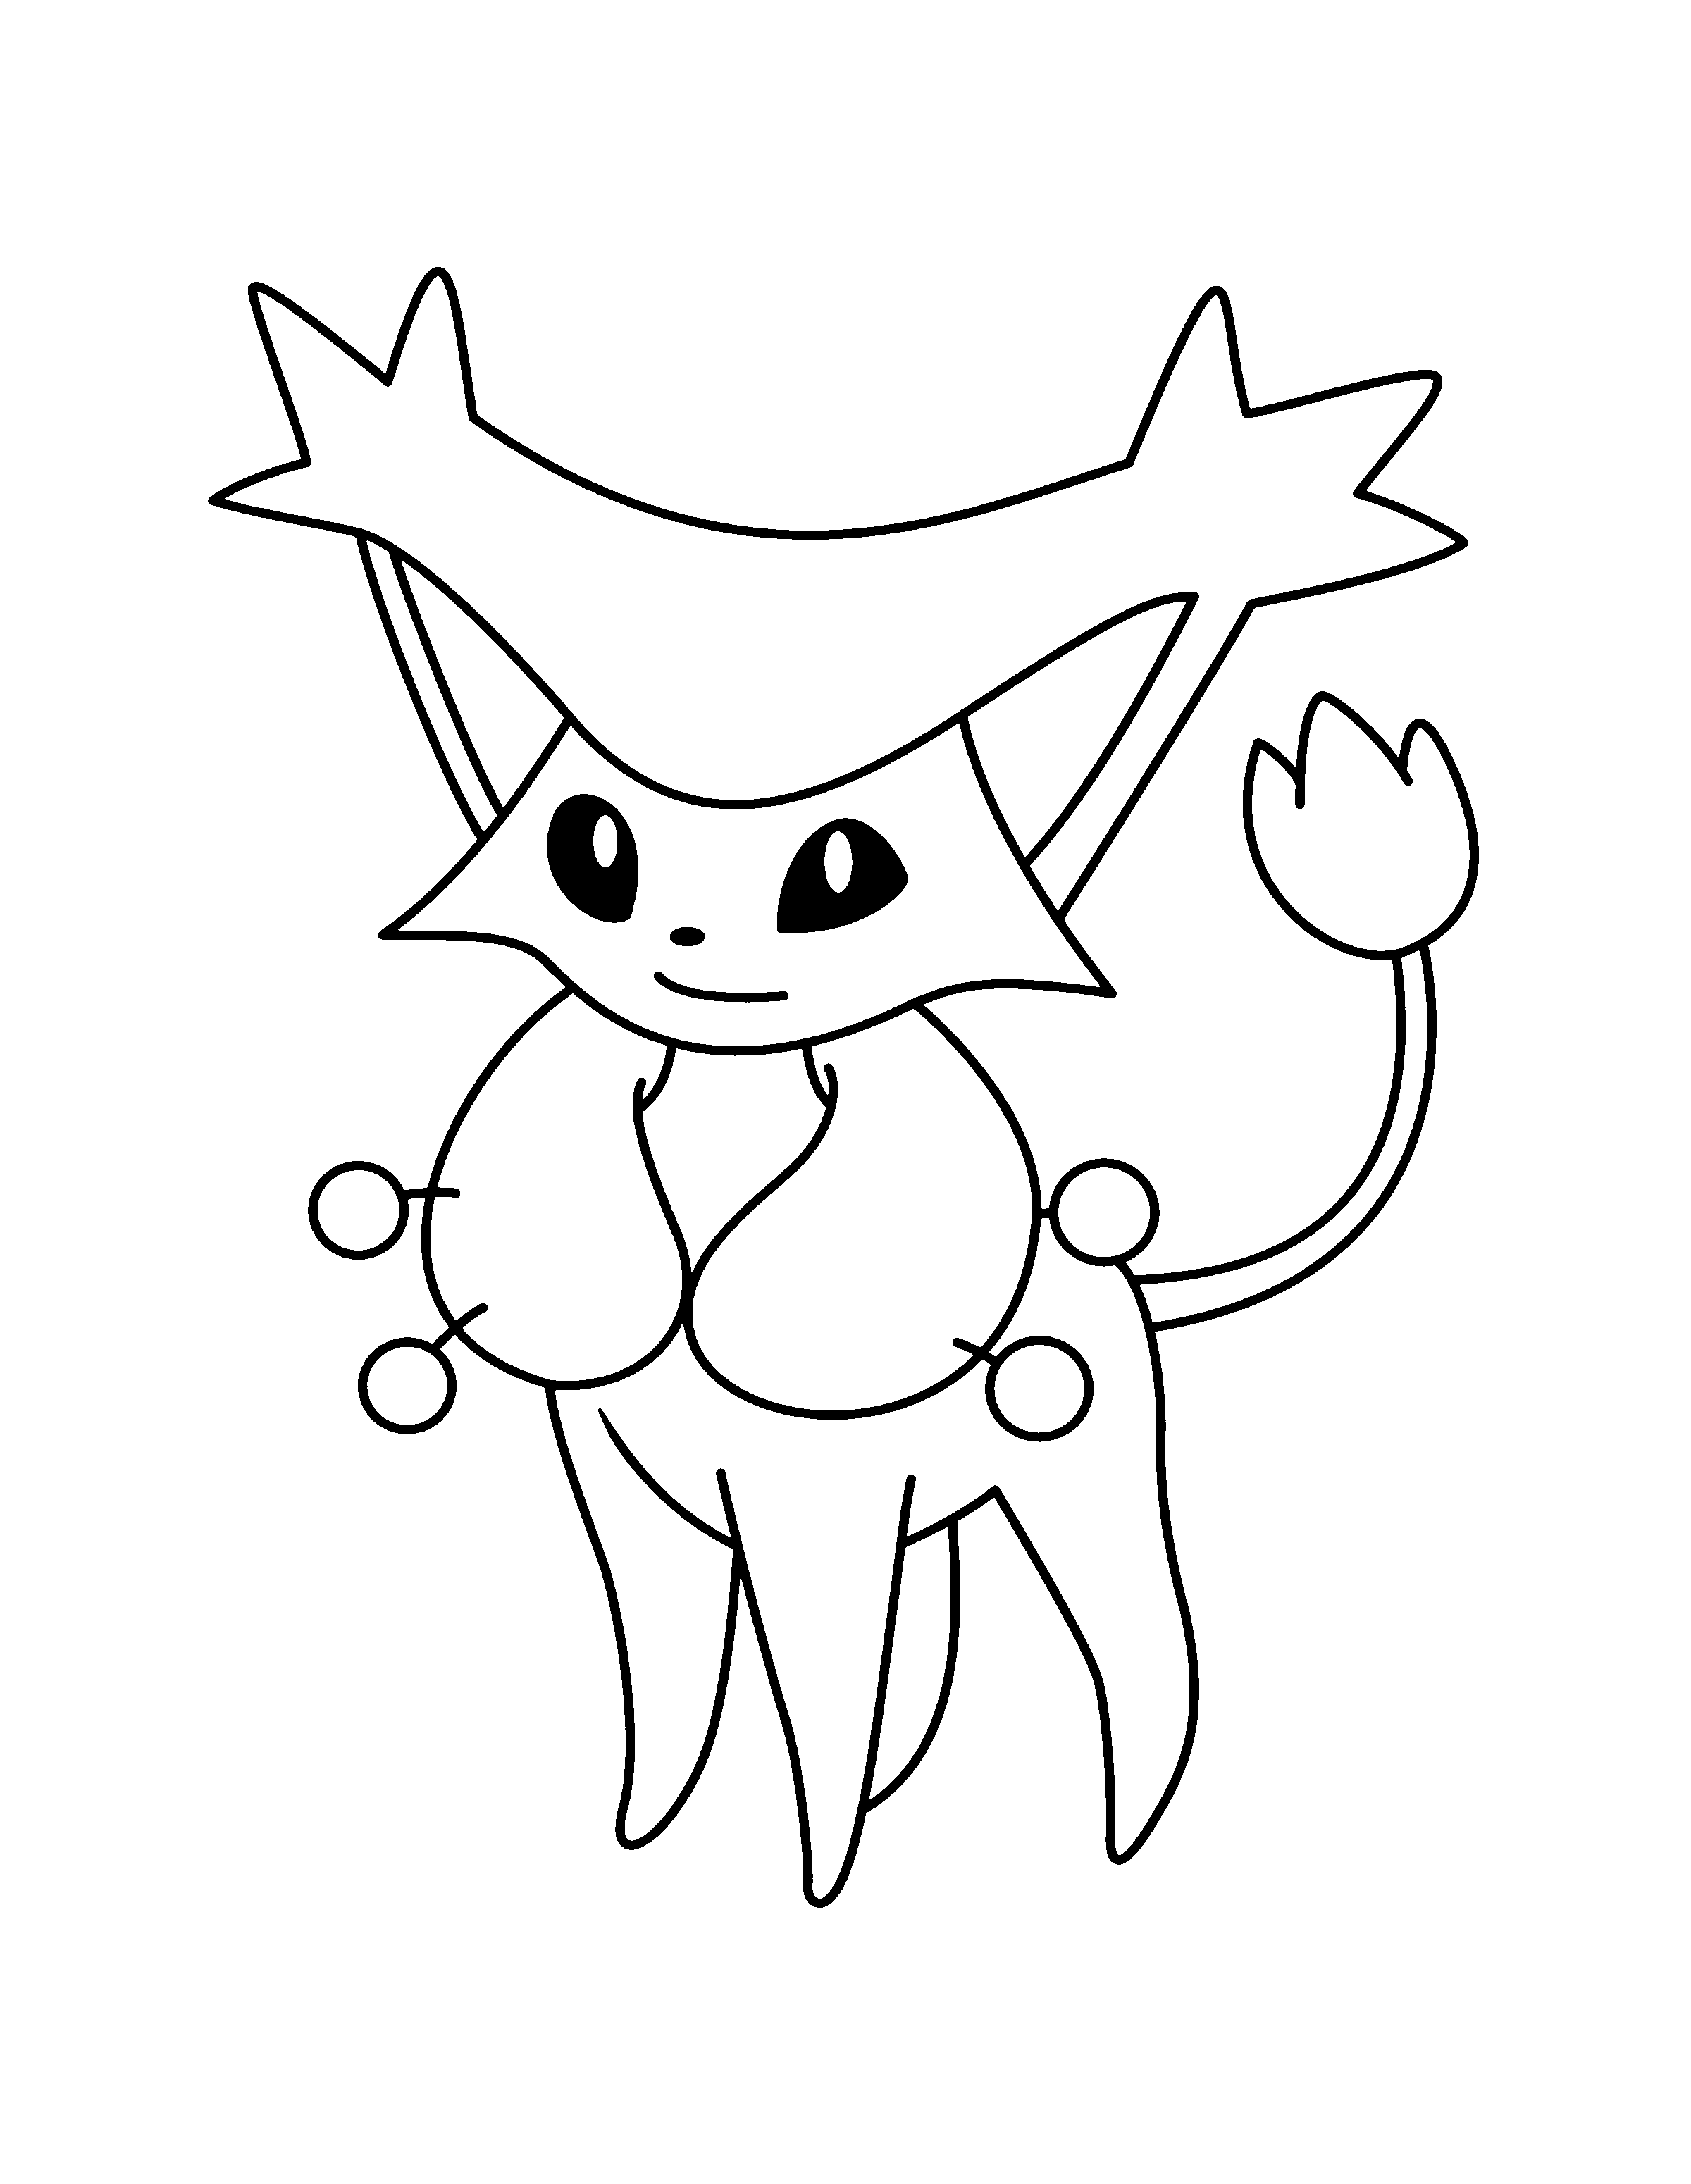 animated-coloring-pages-pokemon-image-1044